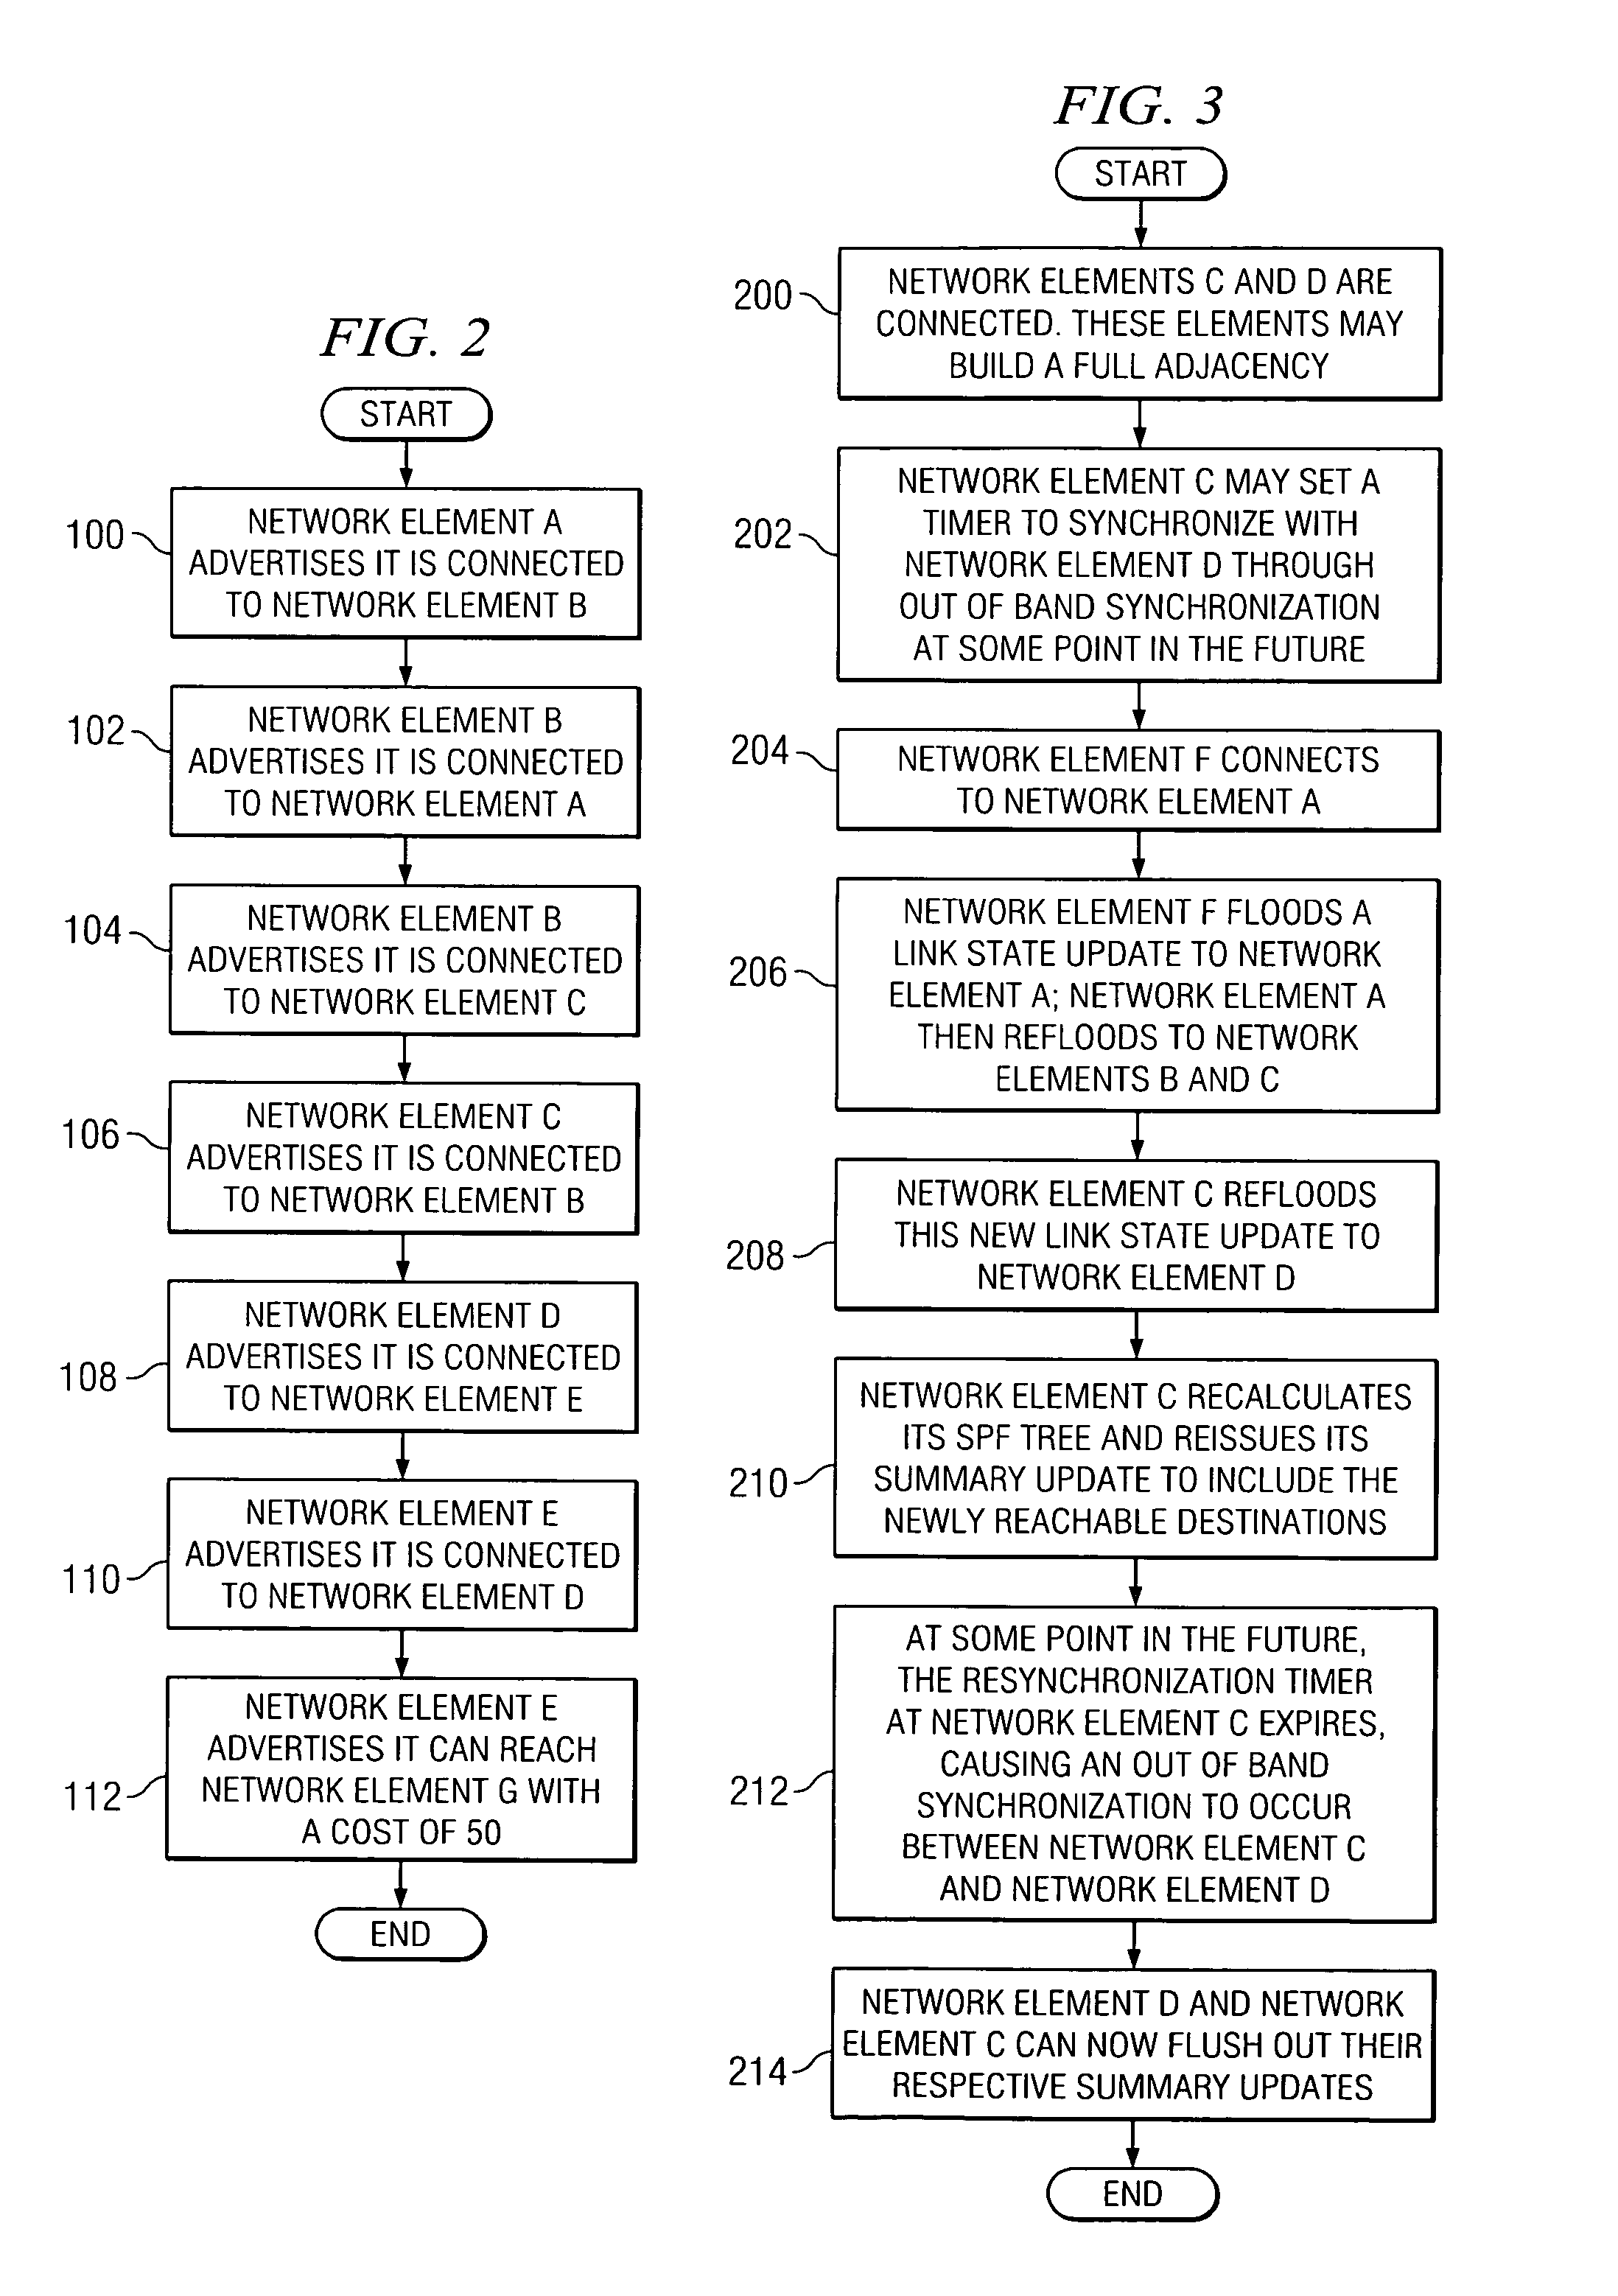 System and method for synchronizing link state databases in a network environment